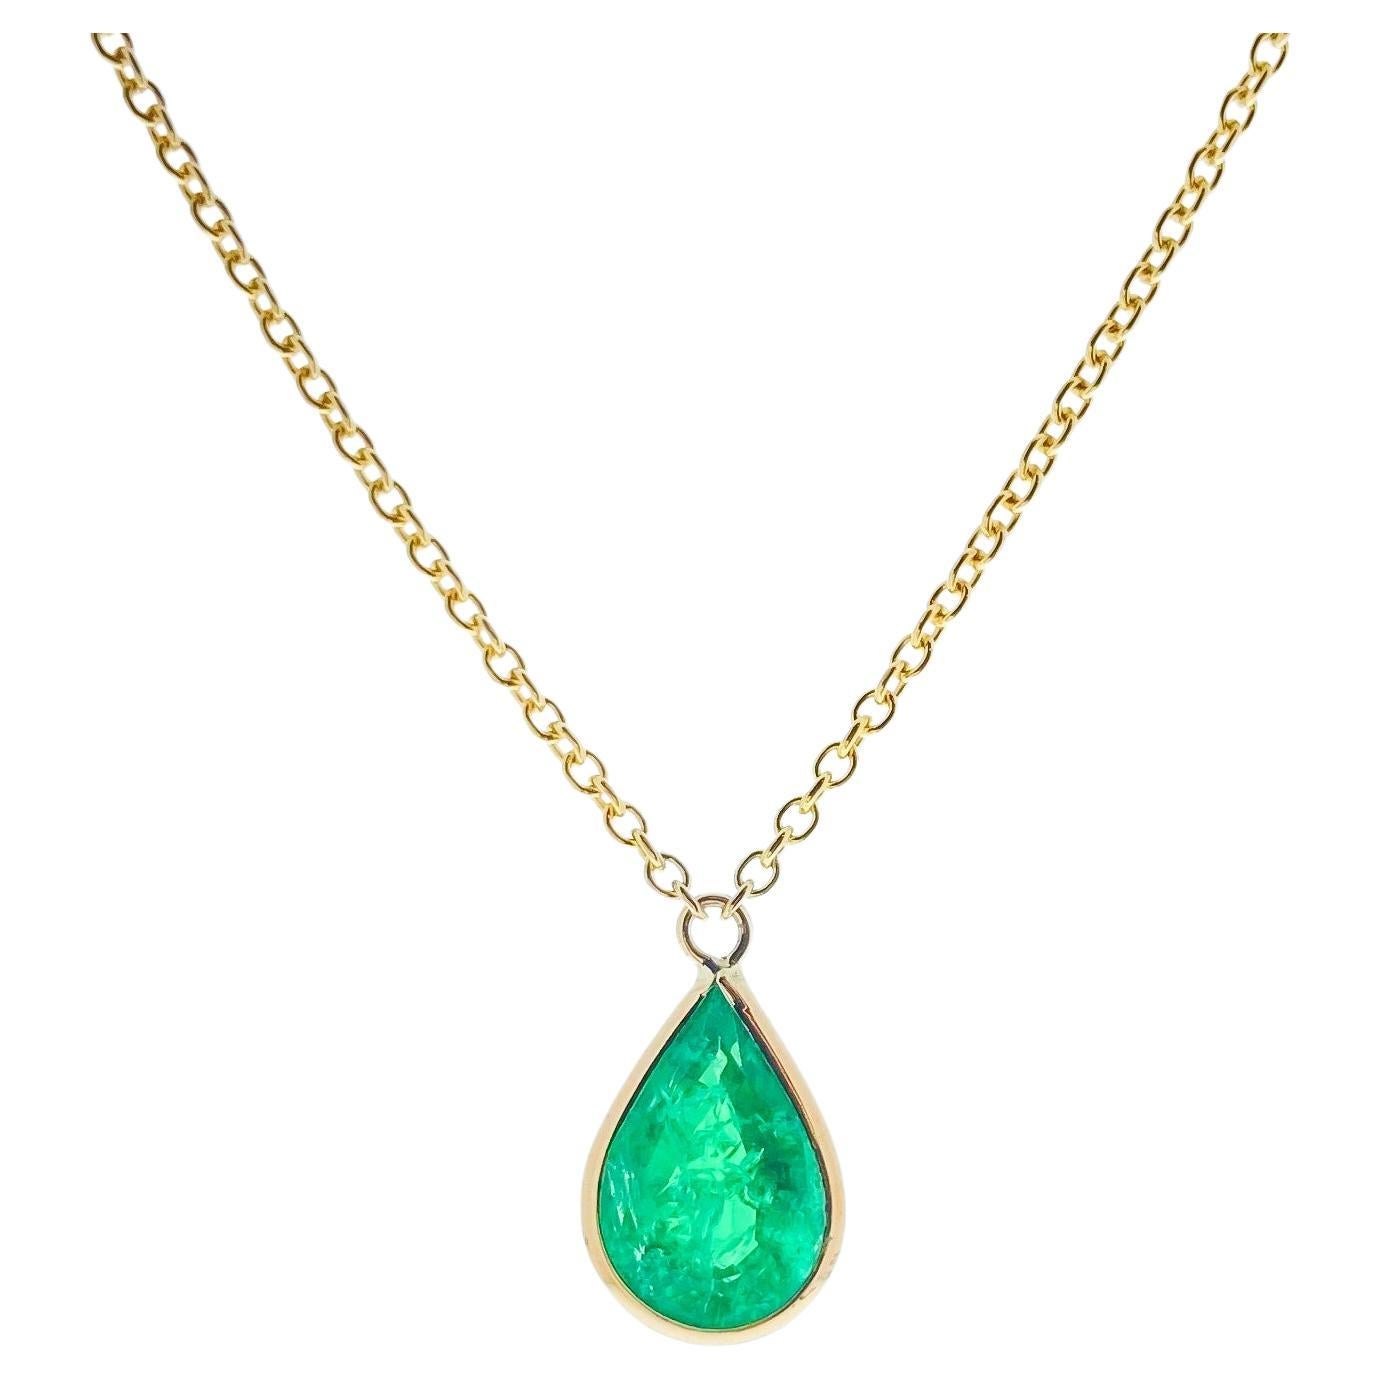 1.34 Carat Green Emerald Pear Shape Fashion Necklaces In 14K Yellow Gold